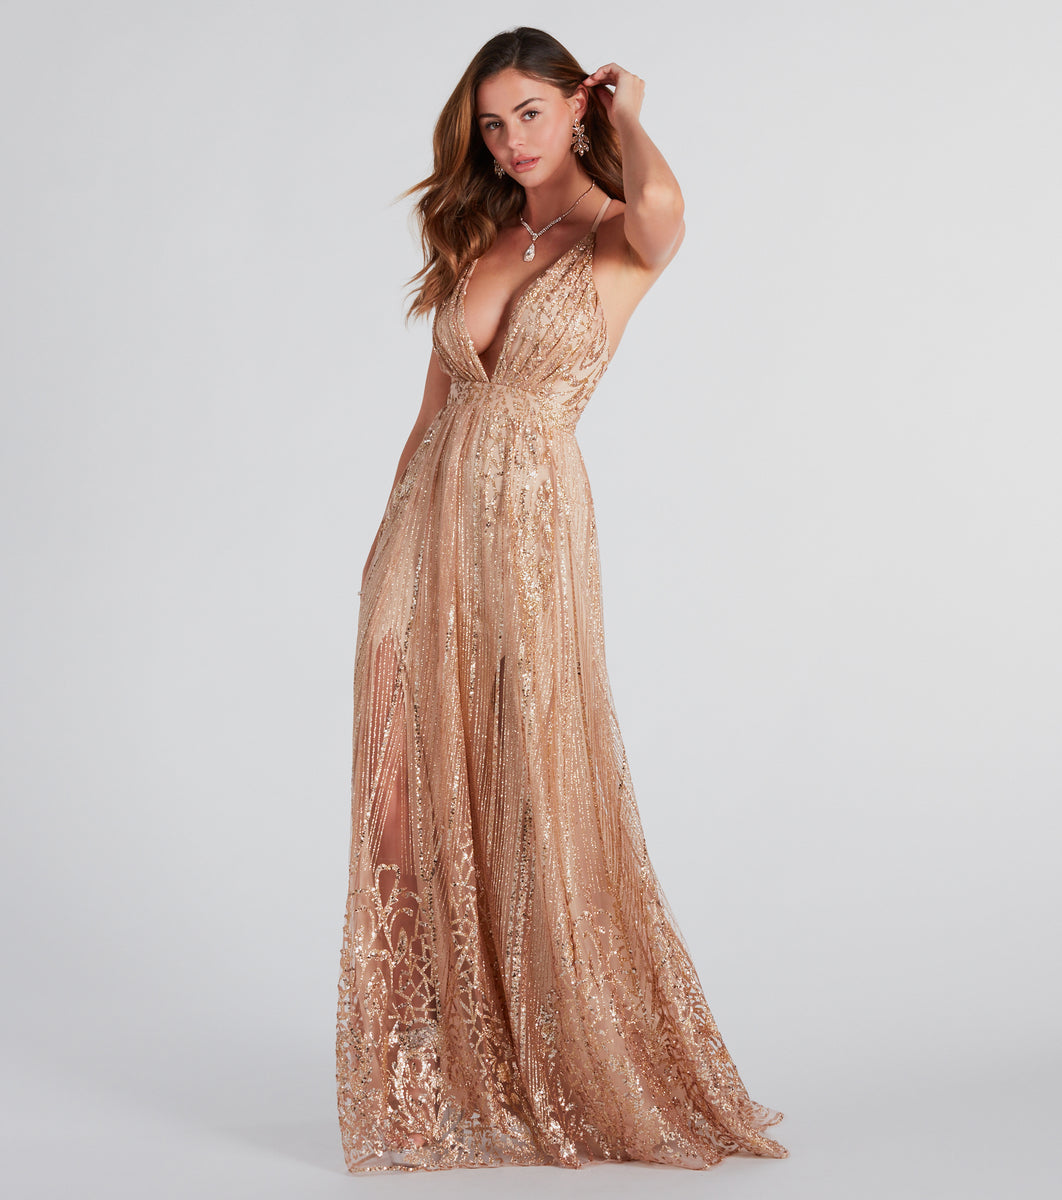 Sequined Gold Flowy Tulle Aline Long Formal Dress with Illusion Neckline -  $123.9768 #MX16038 